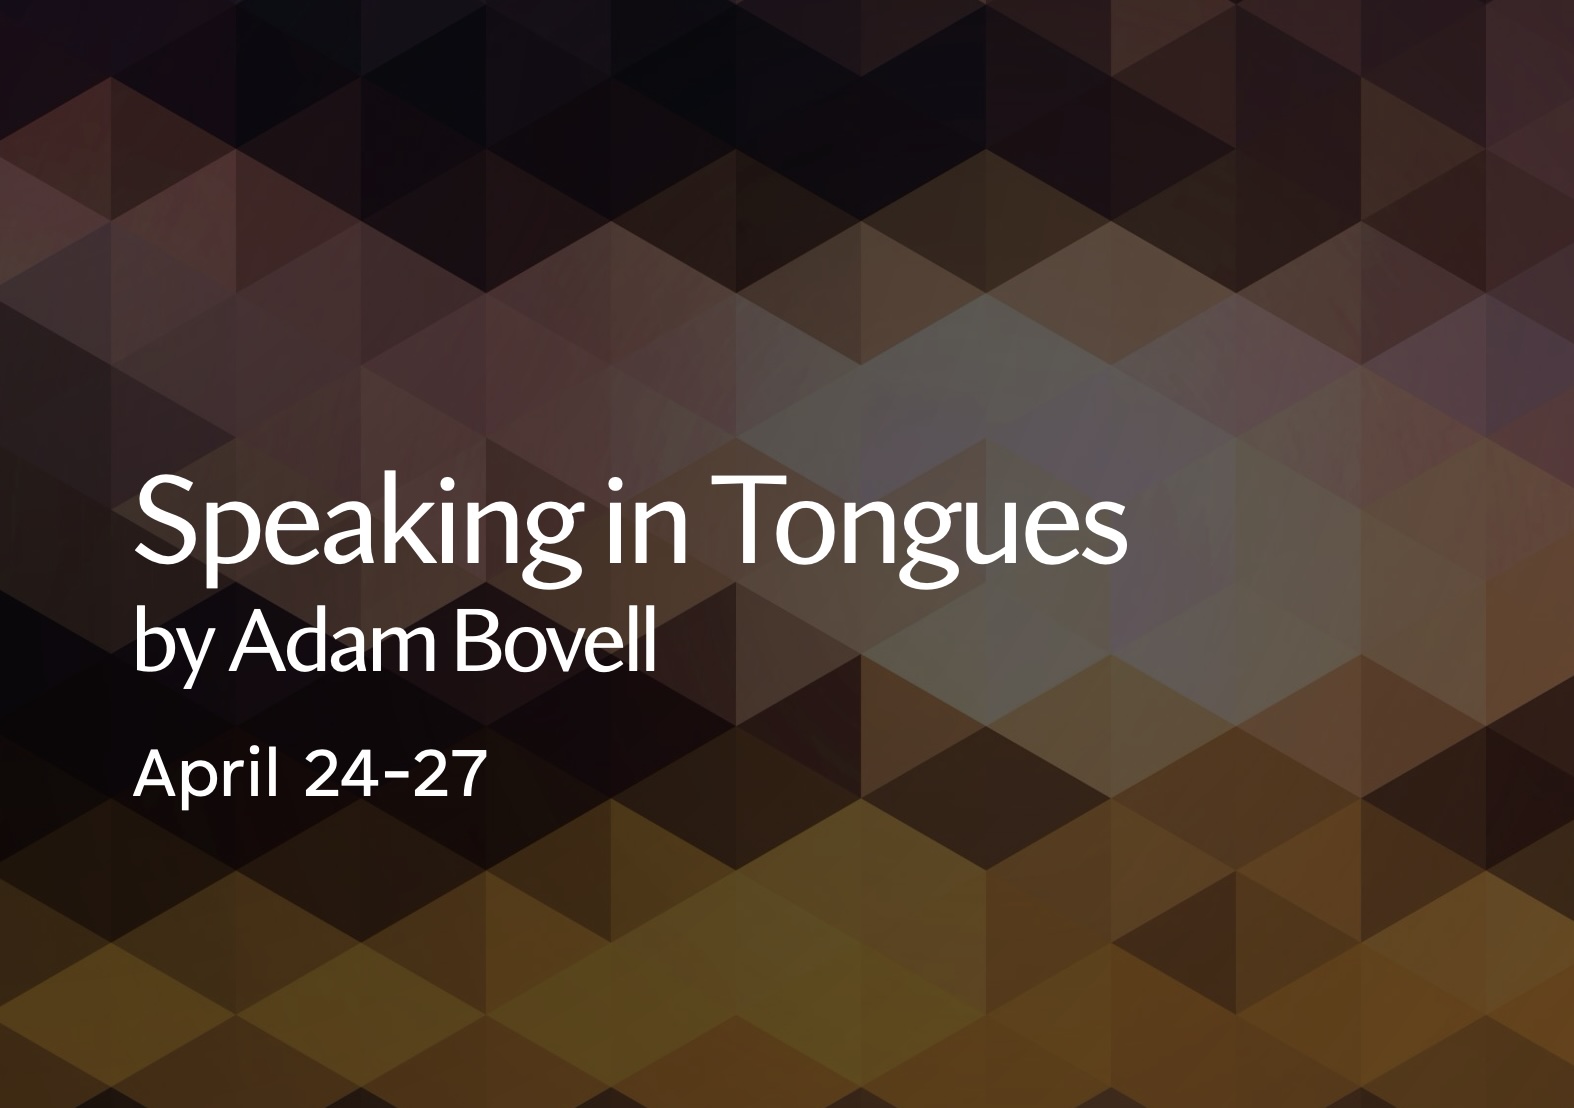 Speaking In Tongues Flyer